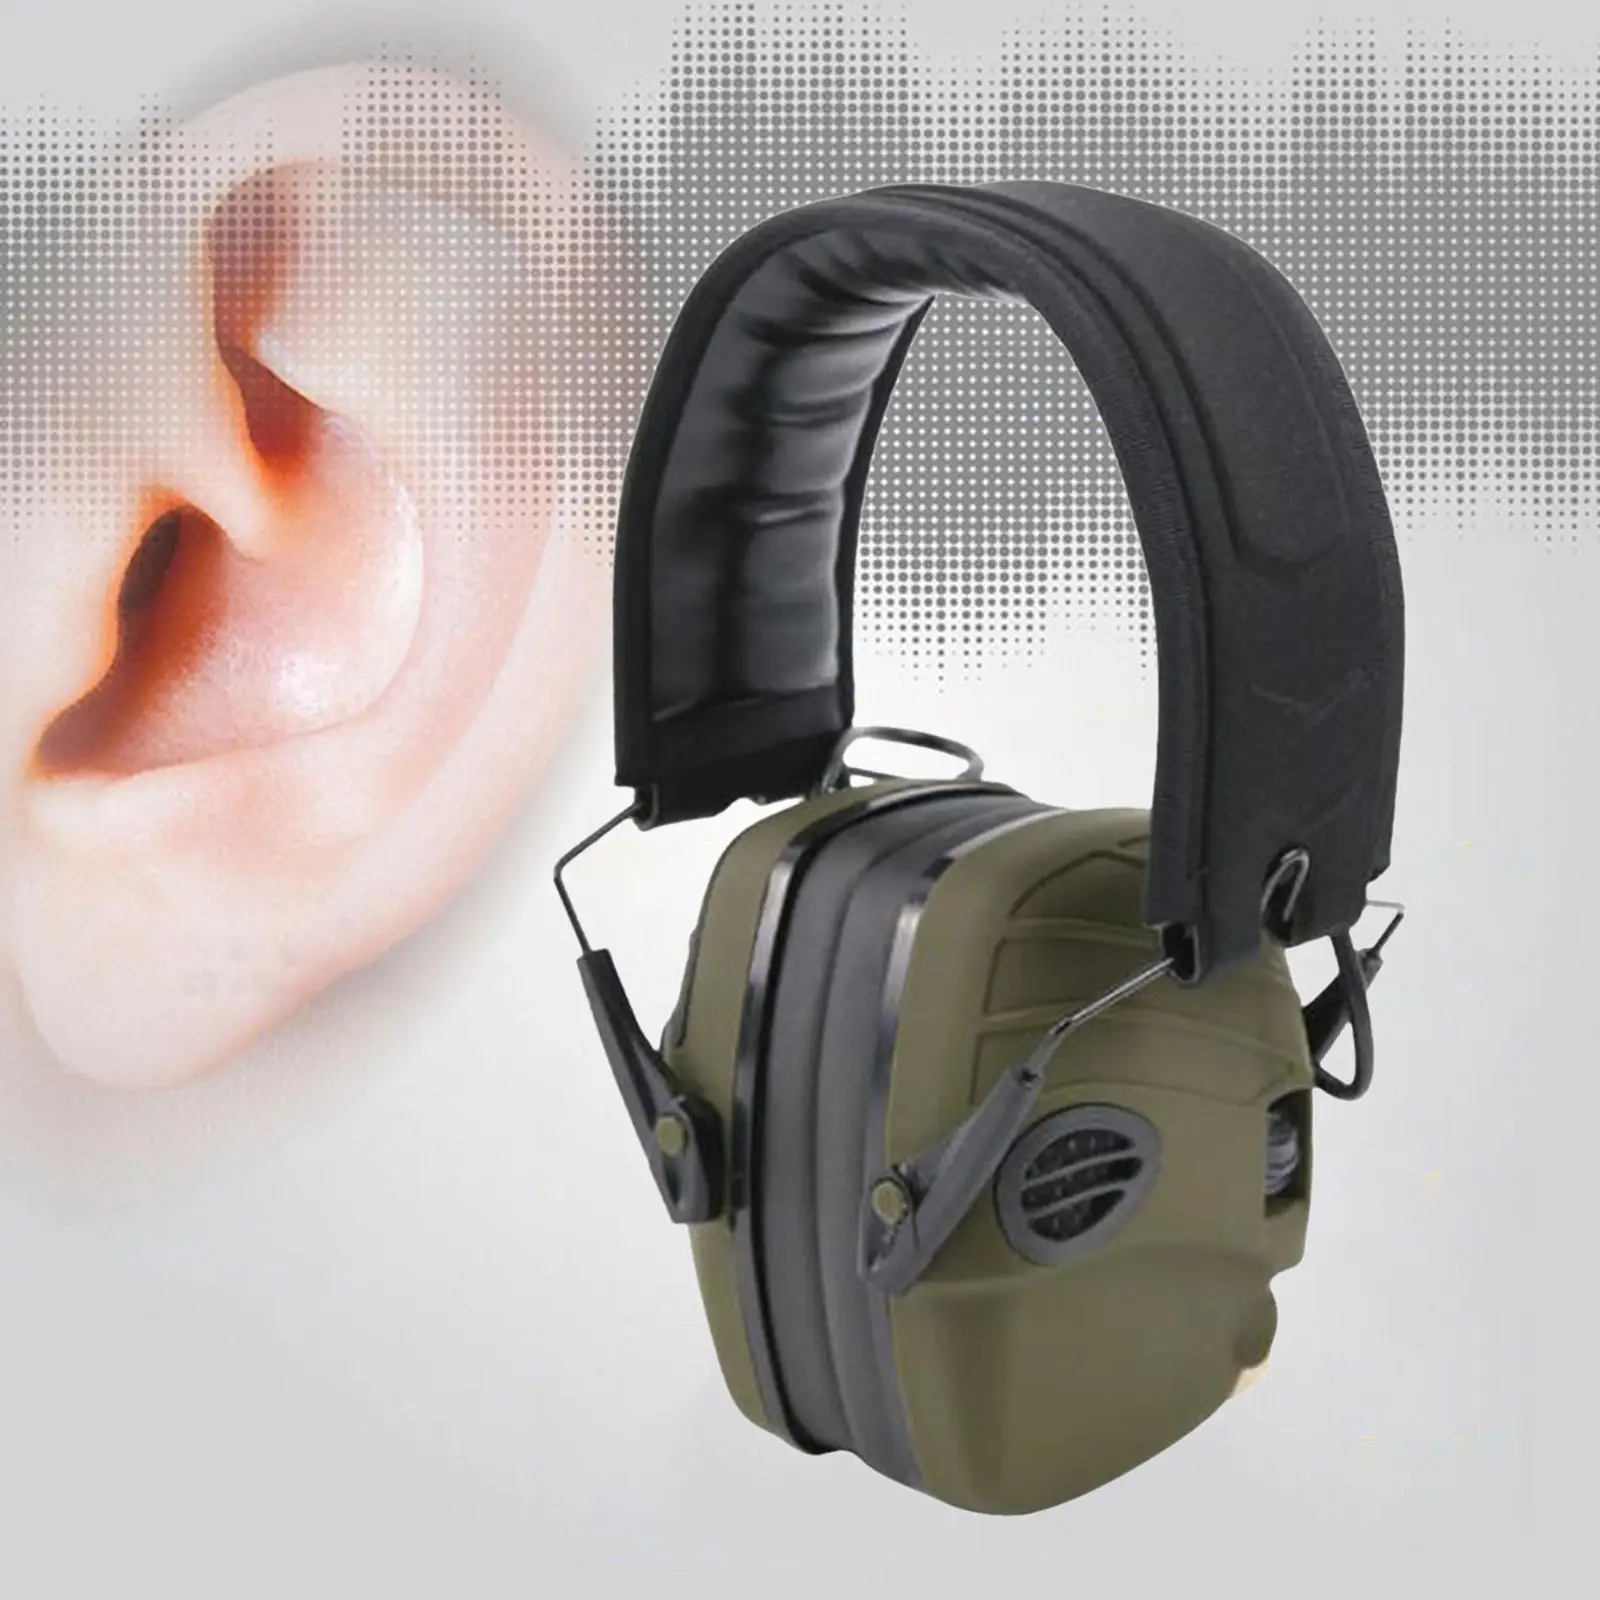 Tactical anti-noise Earmuff for Hunting shooting headphones Noise reduction Electronic Hearing Ear Protection Headphones